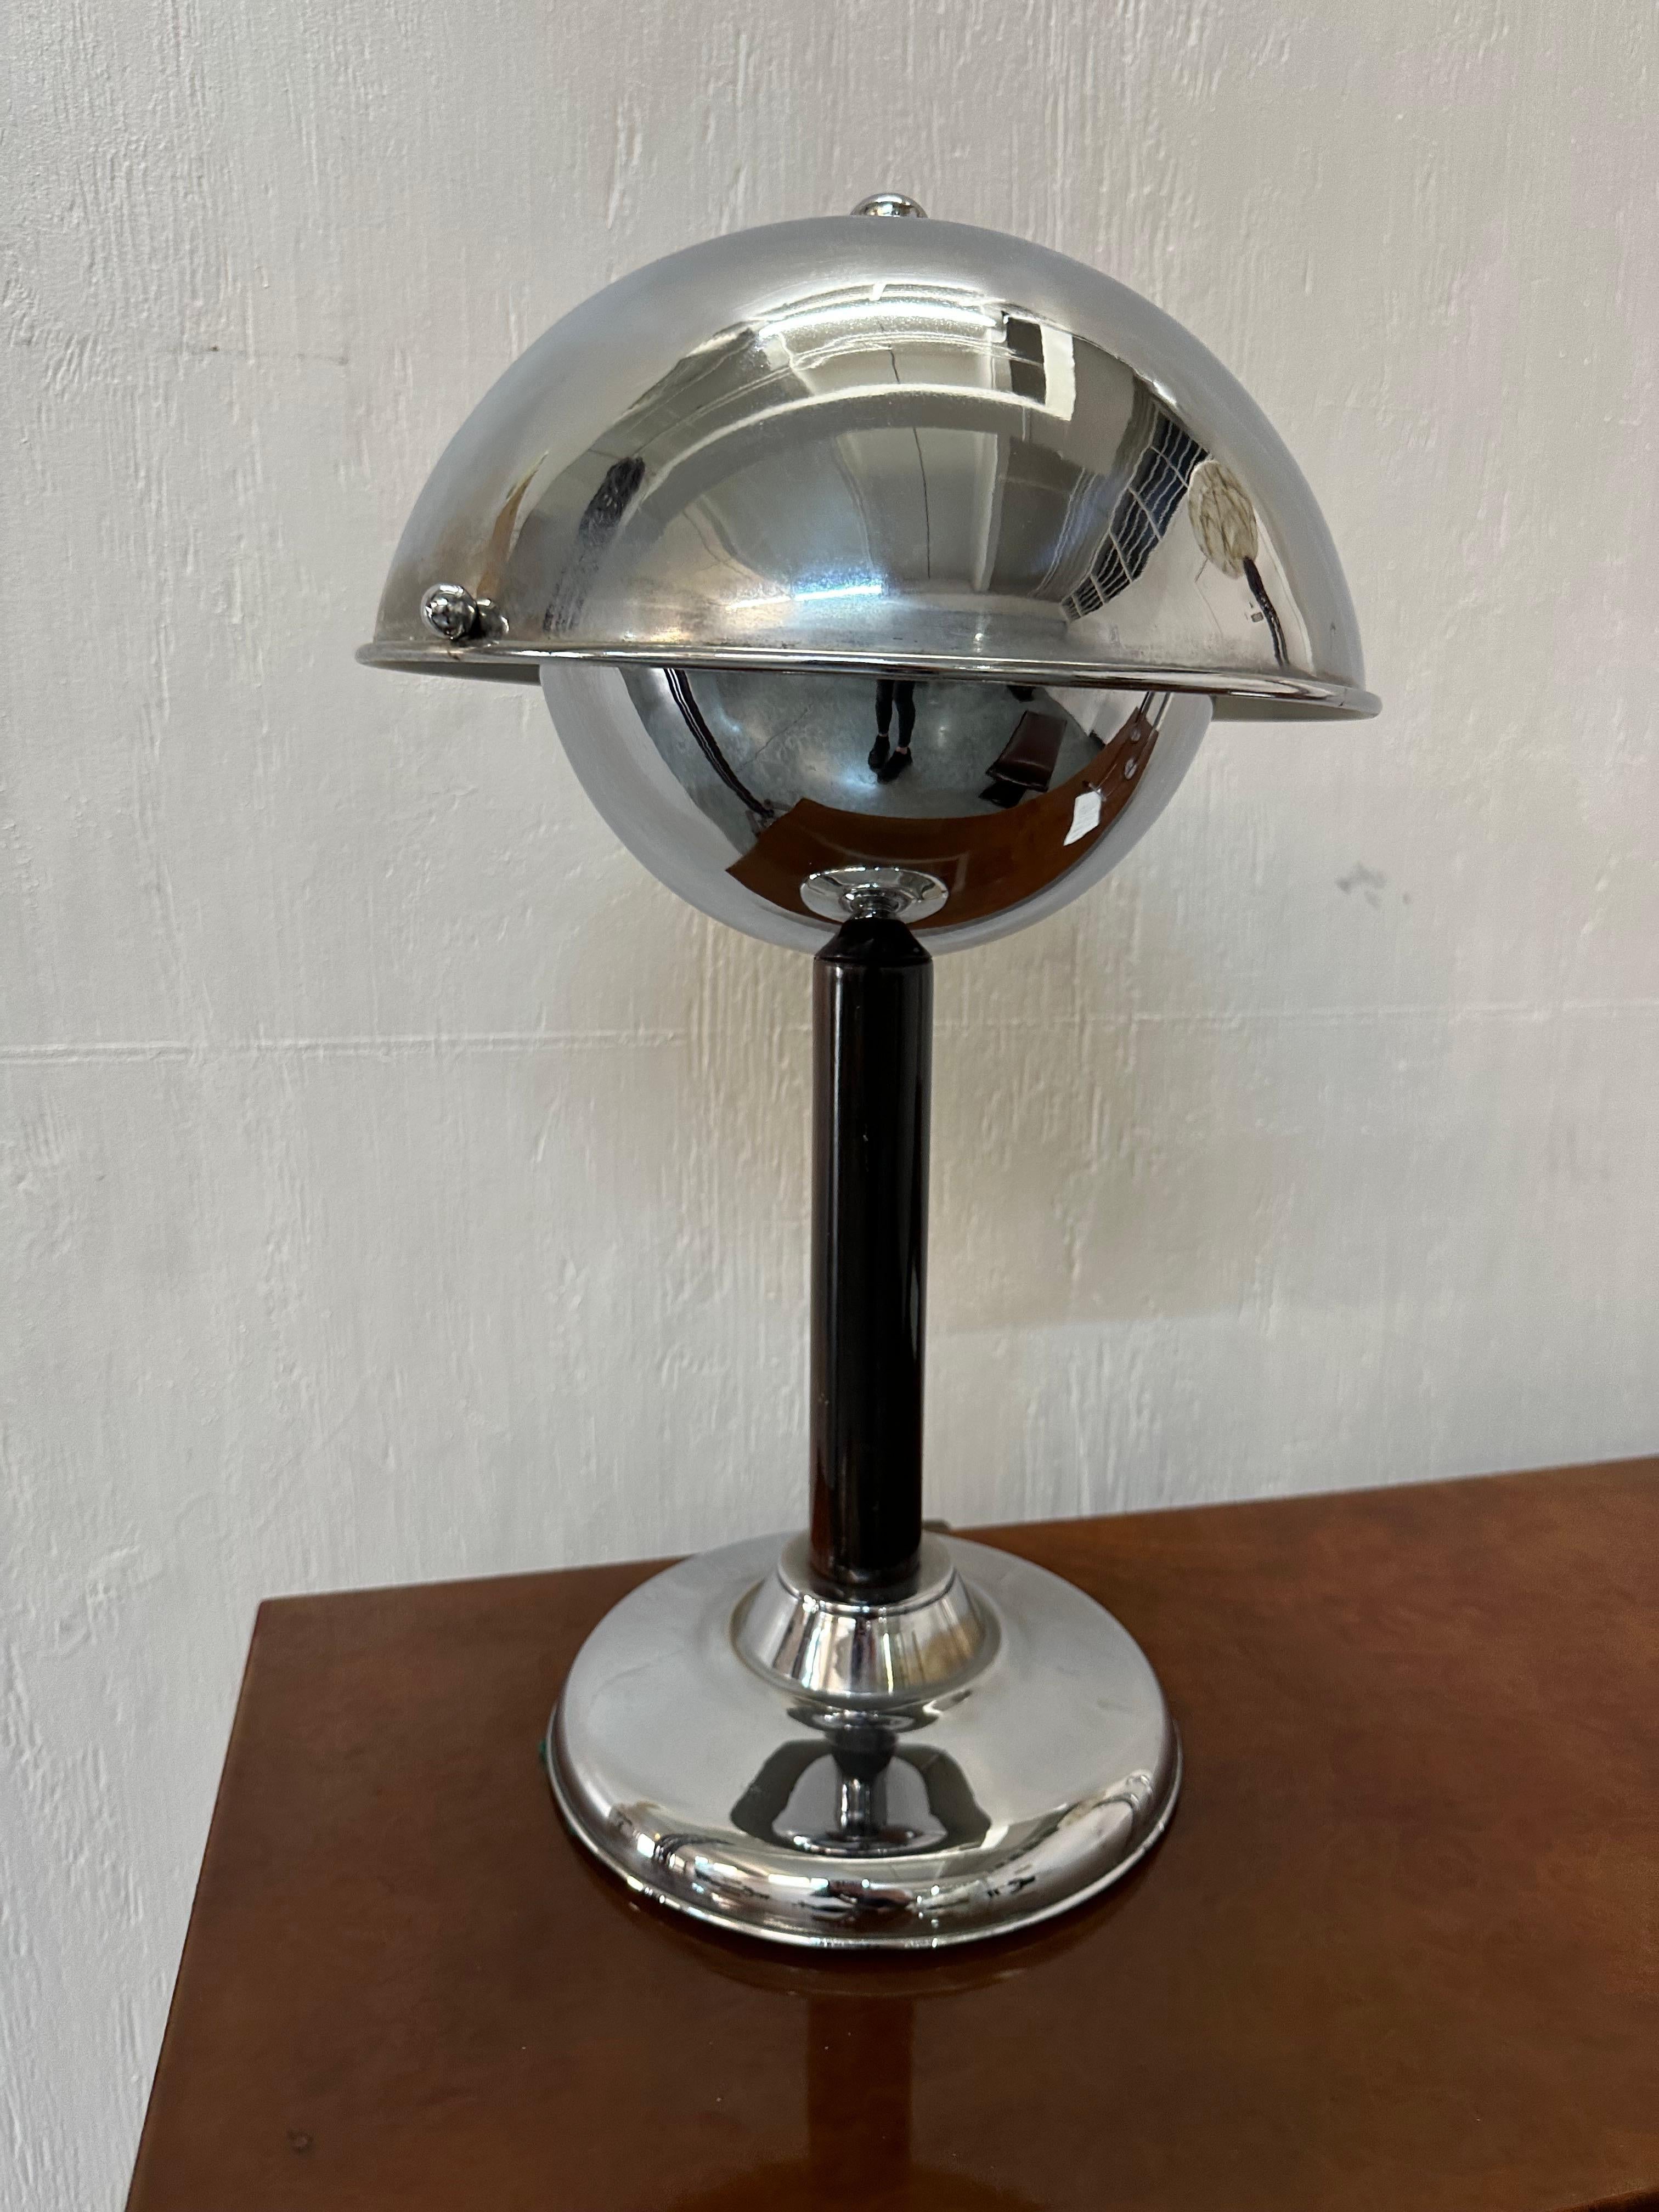 Art Deco Table Lamp in Chrome and Wood, France, 1930 For Sale 5